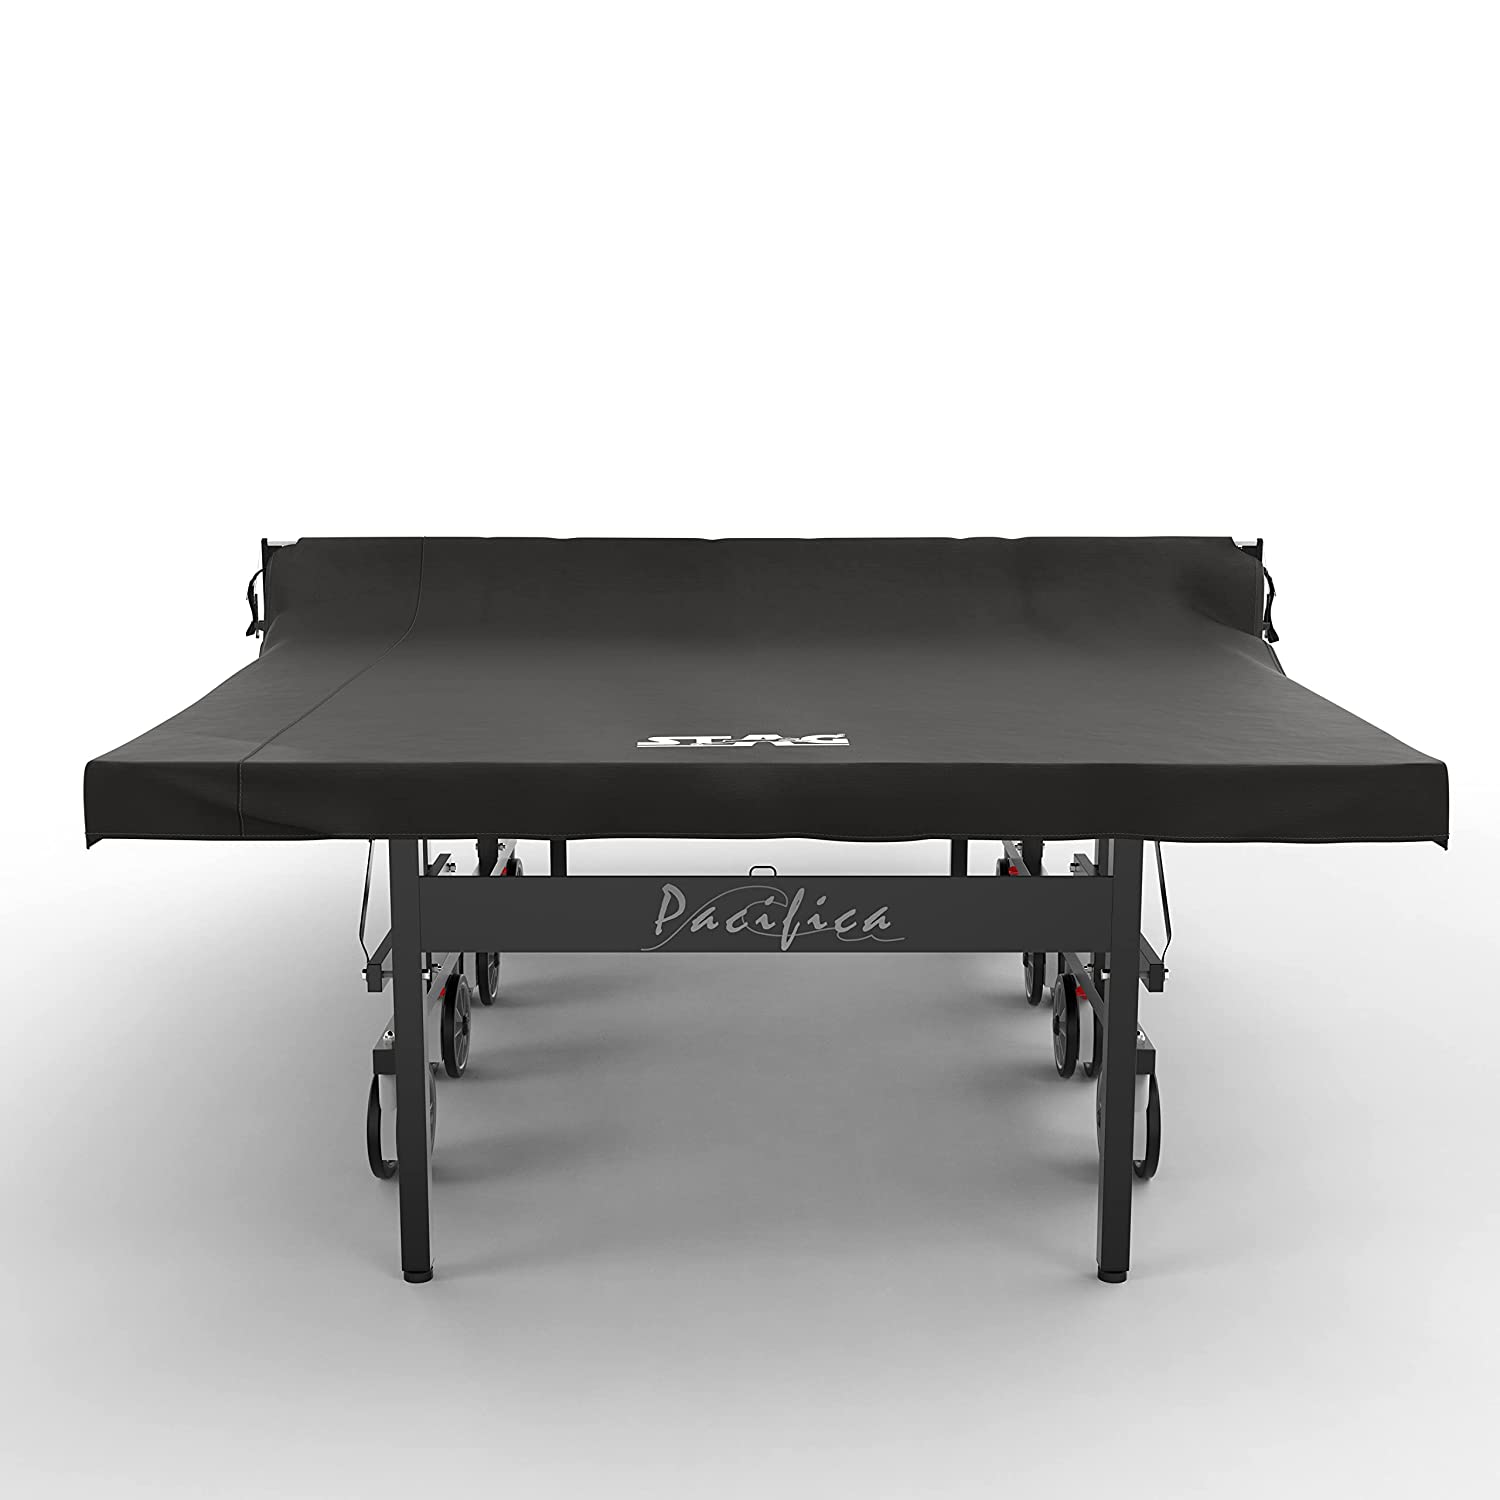 STAG Ping Pong 2 in 1Table Cover Fits Both Folding Tables & Flat Tables - Indoor & Outdoor